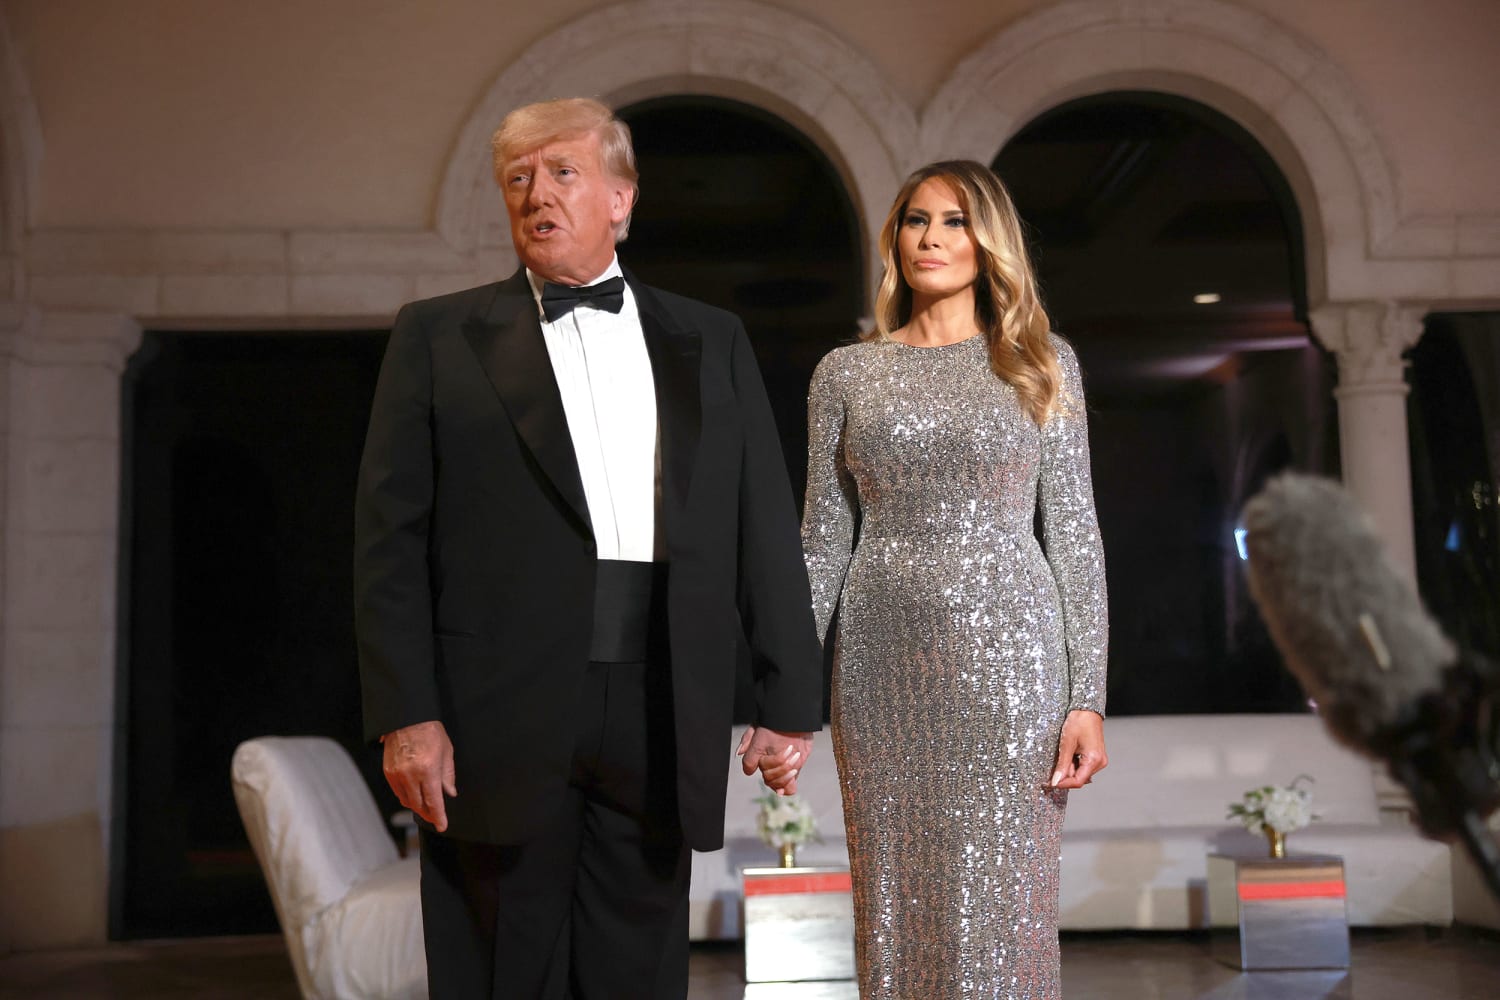 Trump says Melania will be back on the campaign trail with him 'pretty soon'